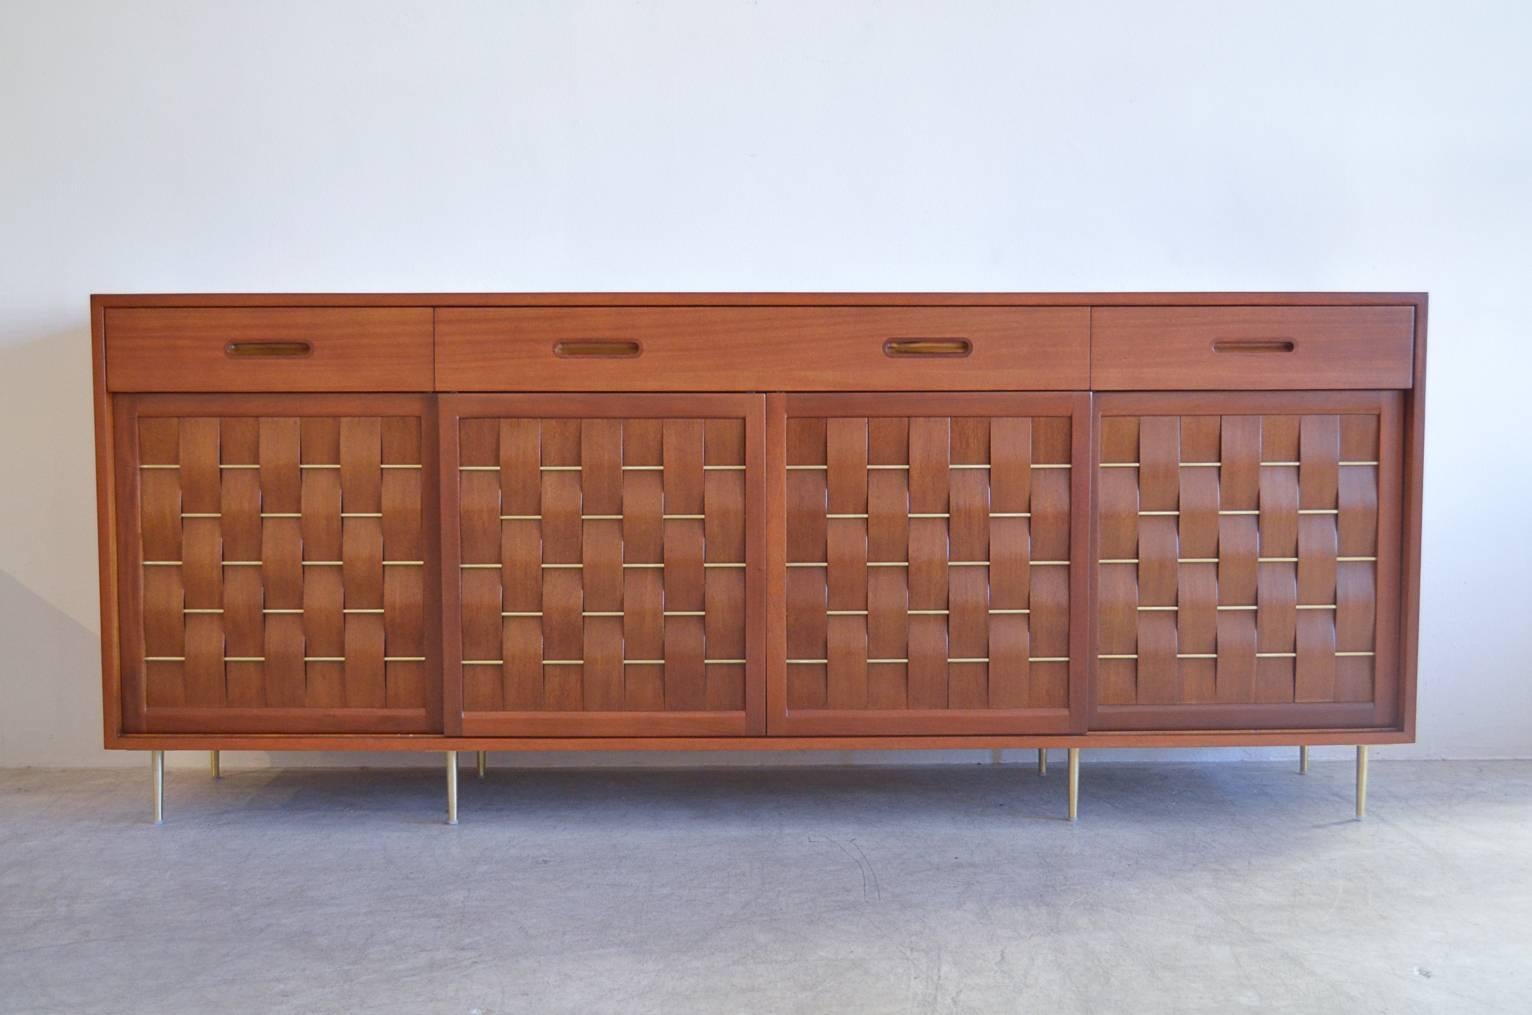 Exceptional and rare ribbon mahogany and brass basketweave front credenza by Edward Wormley for Dunbar of Berne, Indiana.

Professionally restored in perfect showroom condition, this piece has brass rods interwoven into the front and brushed brass